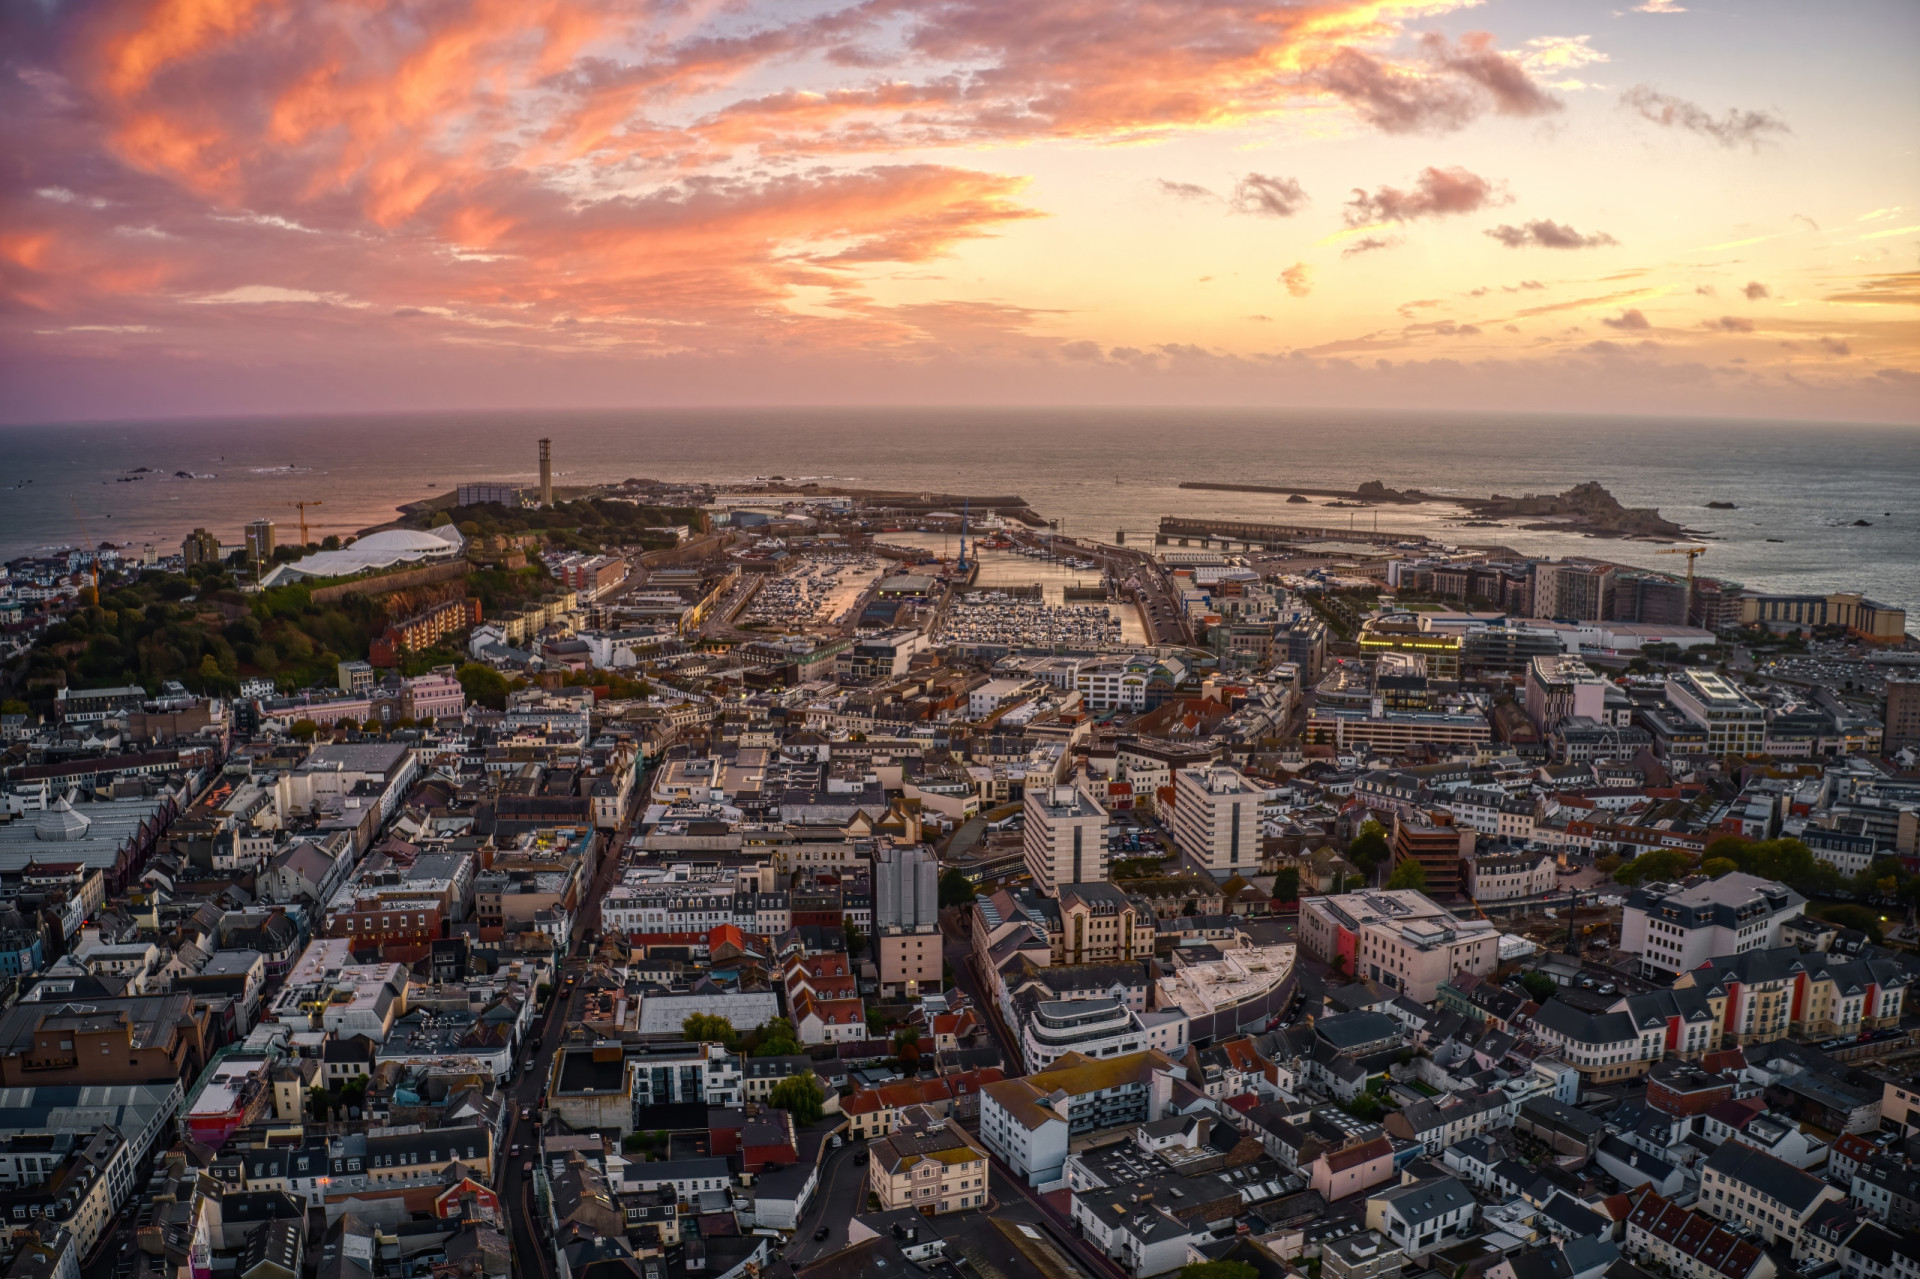 <p>St Helier, with a rent index of 55.2, is a blend of small-town charm and modern living. As the capital of Jersey, it offers a serene lifestyle within its 10.6 km² (4.09 miles²), making it a uniquely upscale destination.</p><p><a href="https://www.msn.com/en-in/community/channel/vid-7xx8mnucu55yw63we9va2gwr7uihbxwc68fxqp25x6tg4ftibpra?cvid=94631541bc0f4f89bfd59158d696ad7e">Follow us and access great exclusive content every day</a></p>